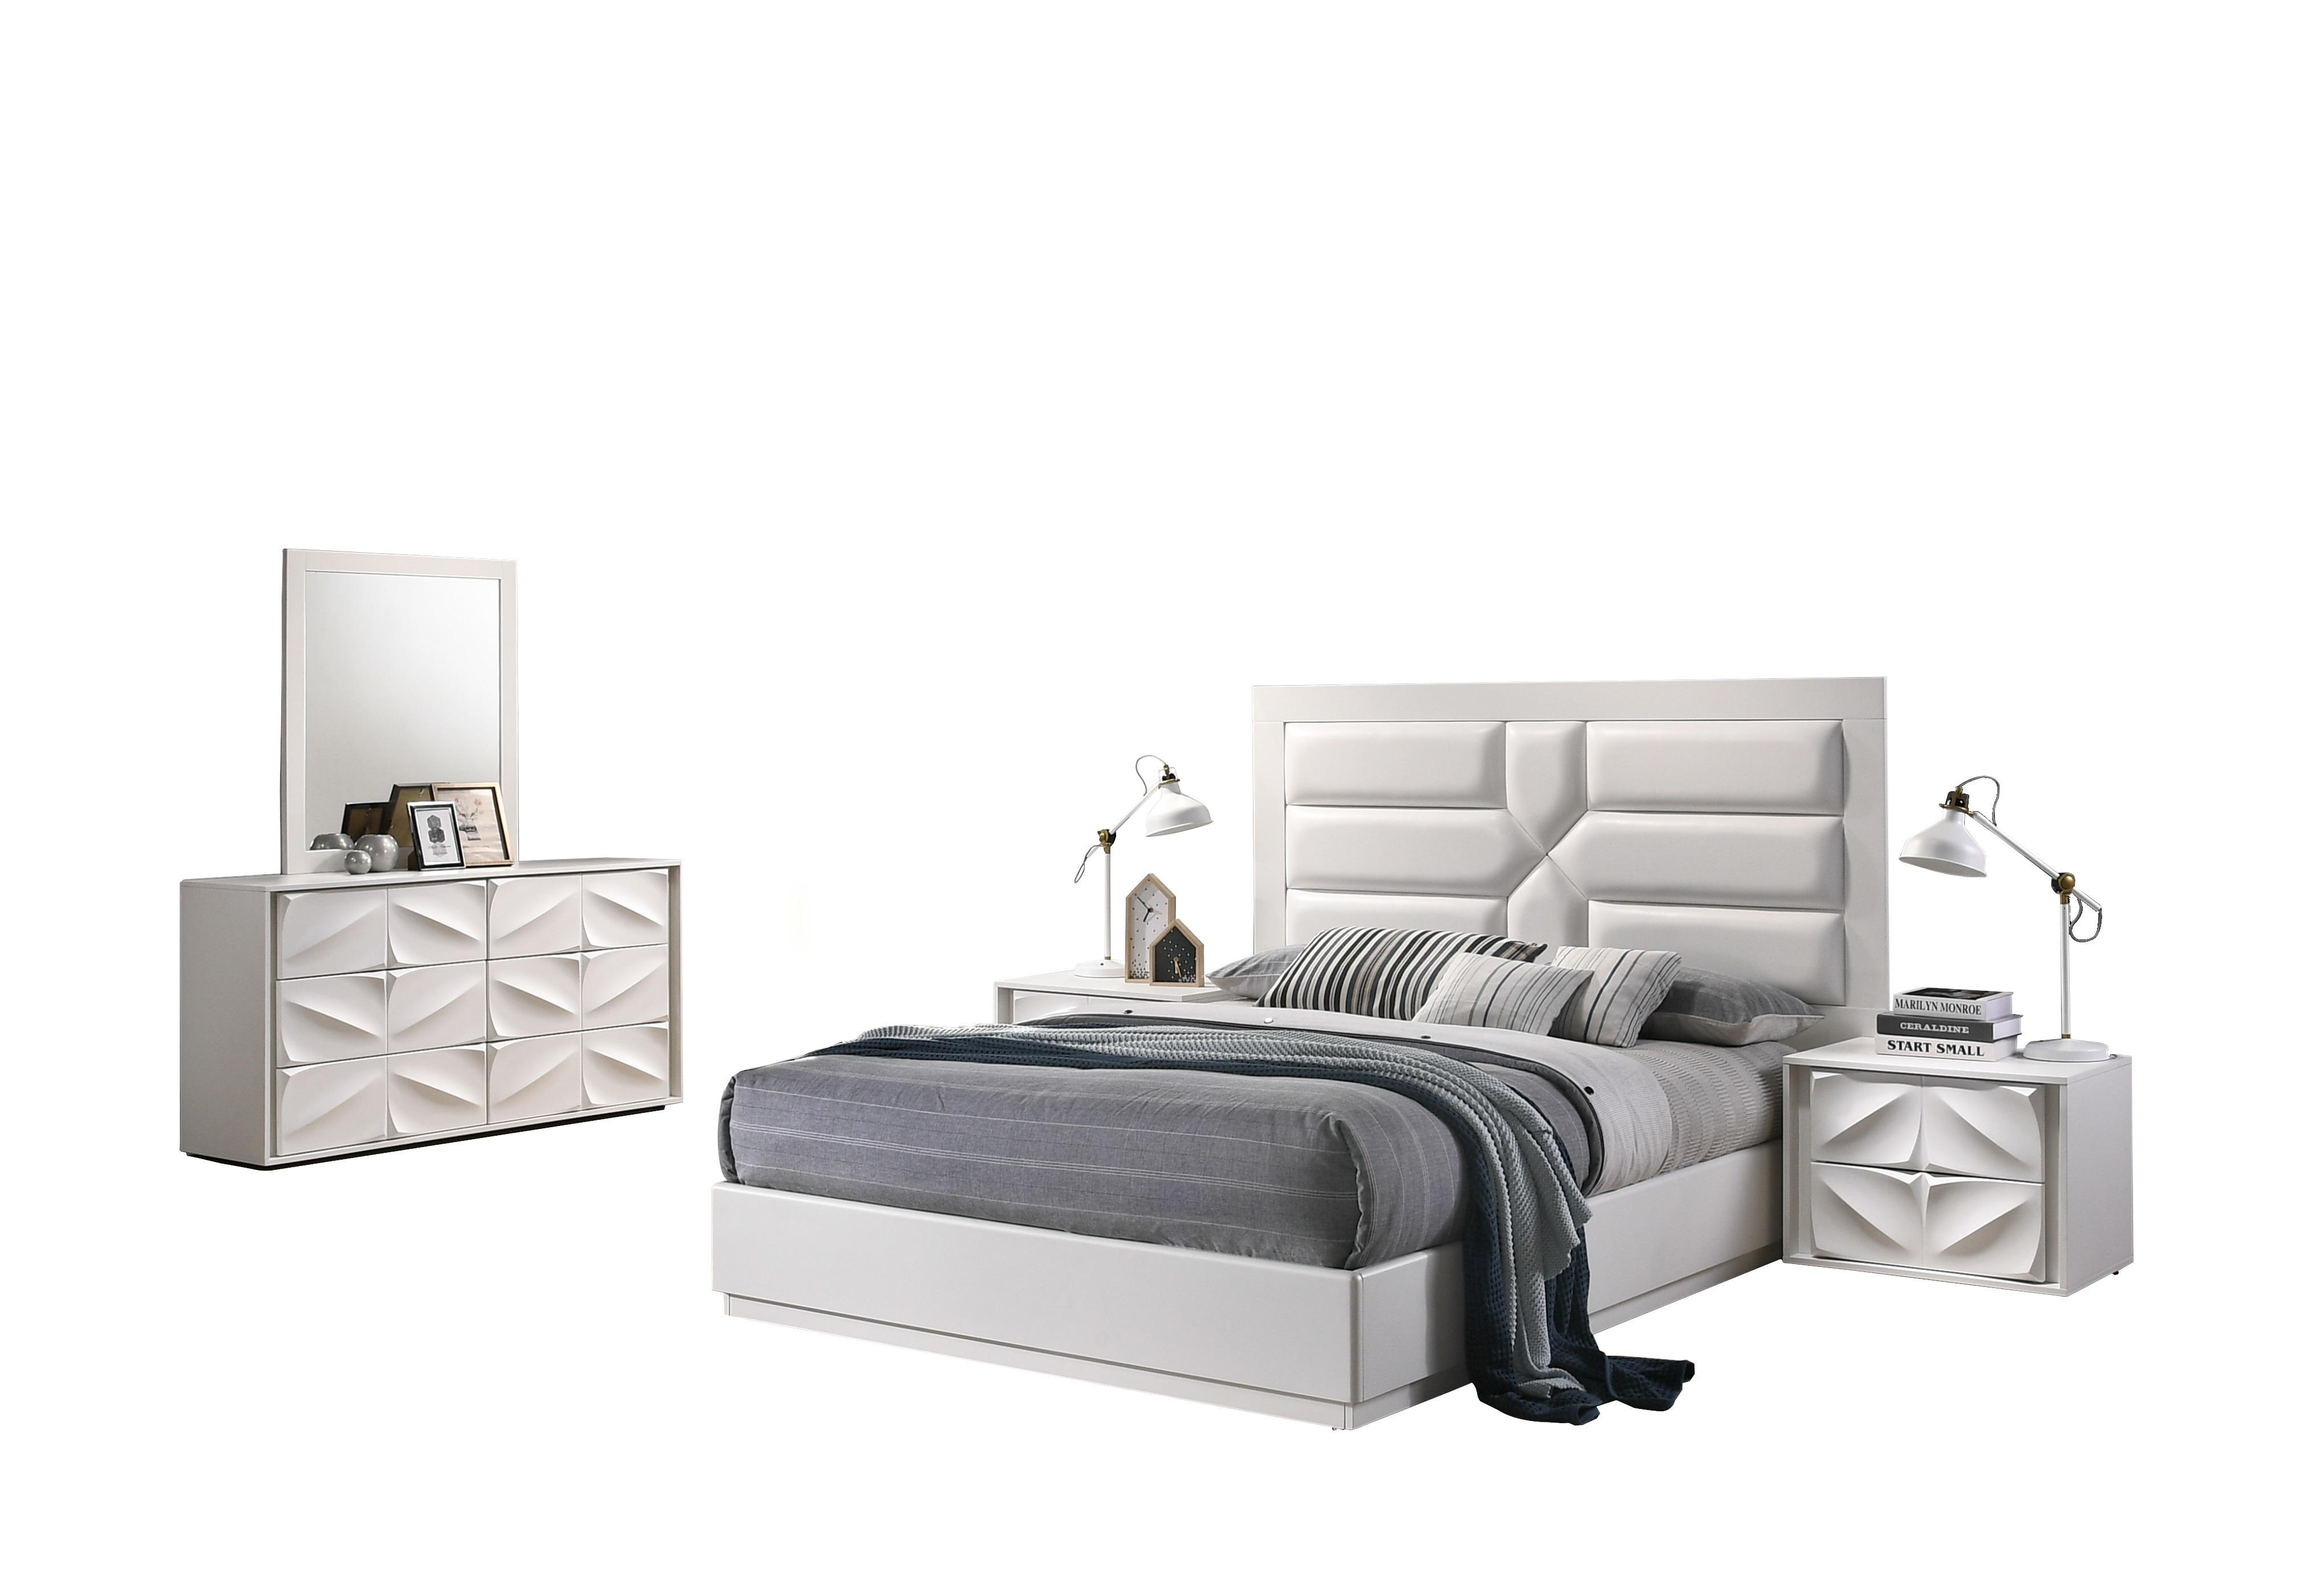 Contemporary Platform Bedroom Set Amsterdam AMSTERDAM-QUEEN-2NDM-5PC in White Leatherette